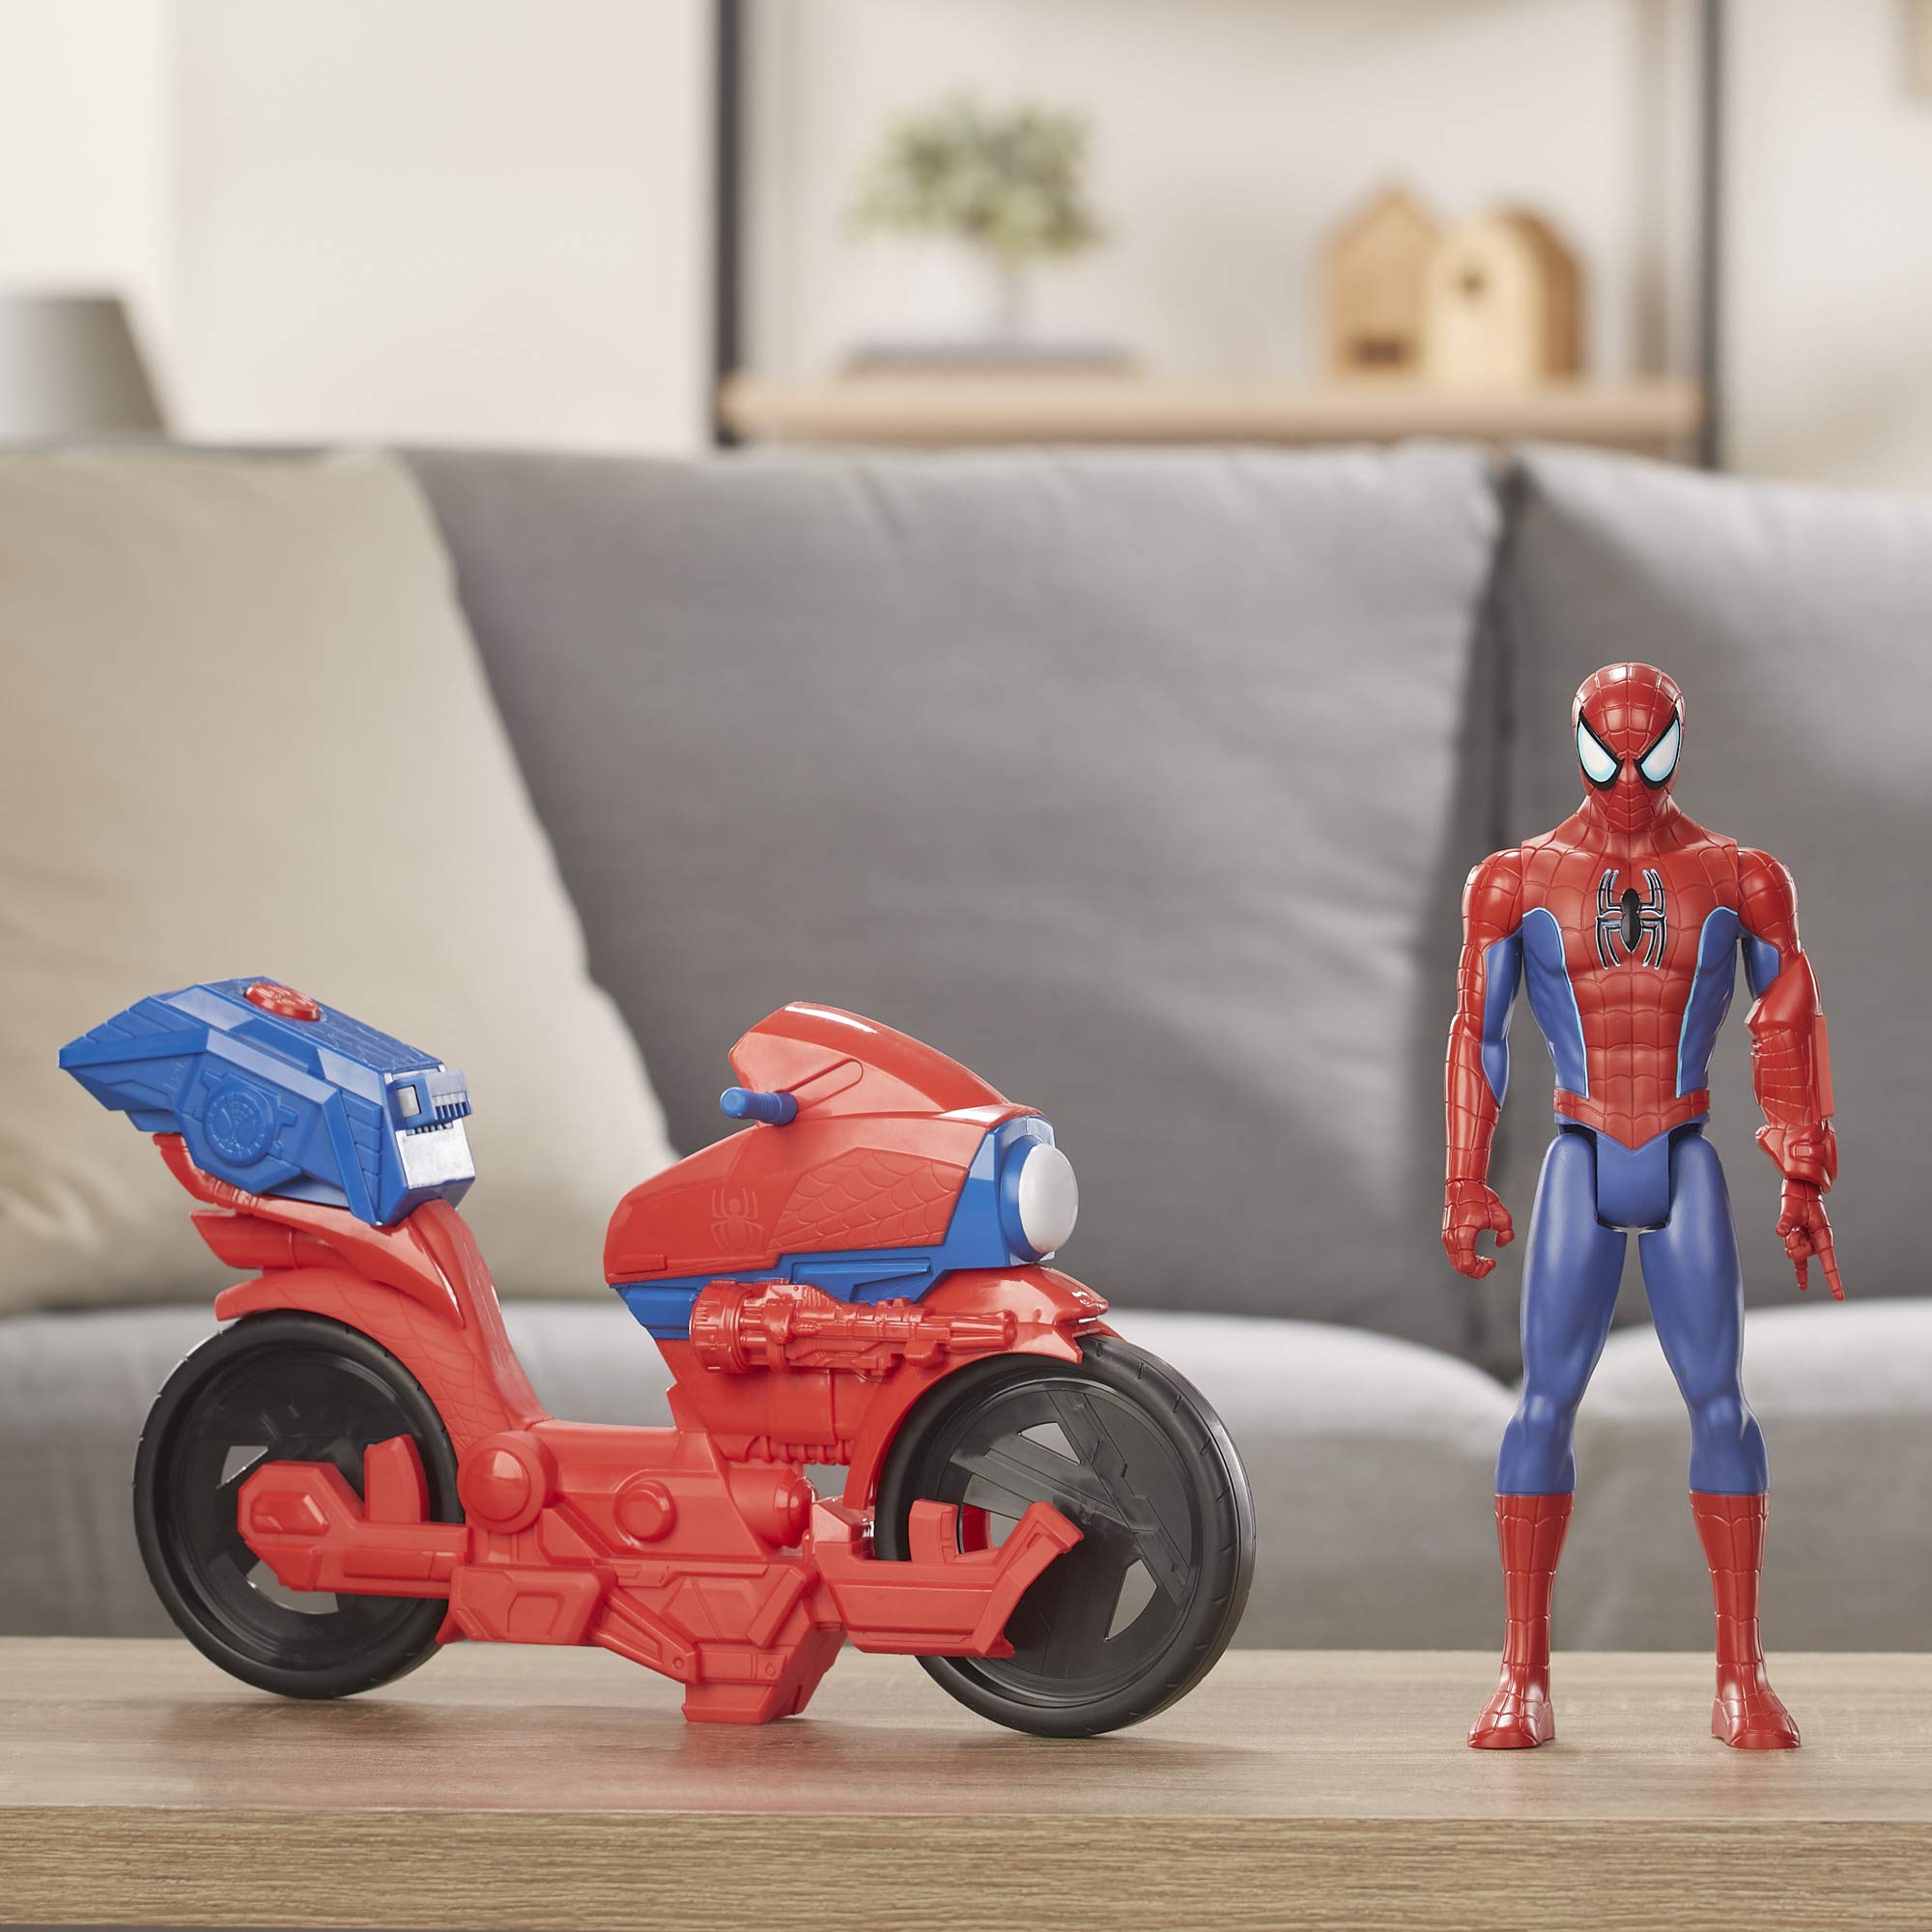 Spider-Man Titan Hero Series Figure with Power Fx Cycle Plays Sounds & Phrases